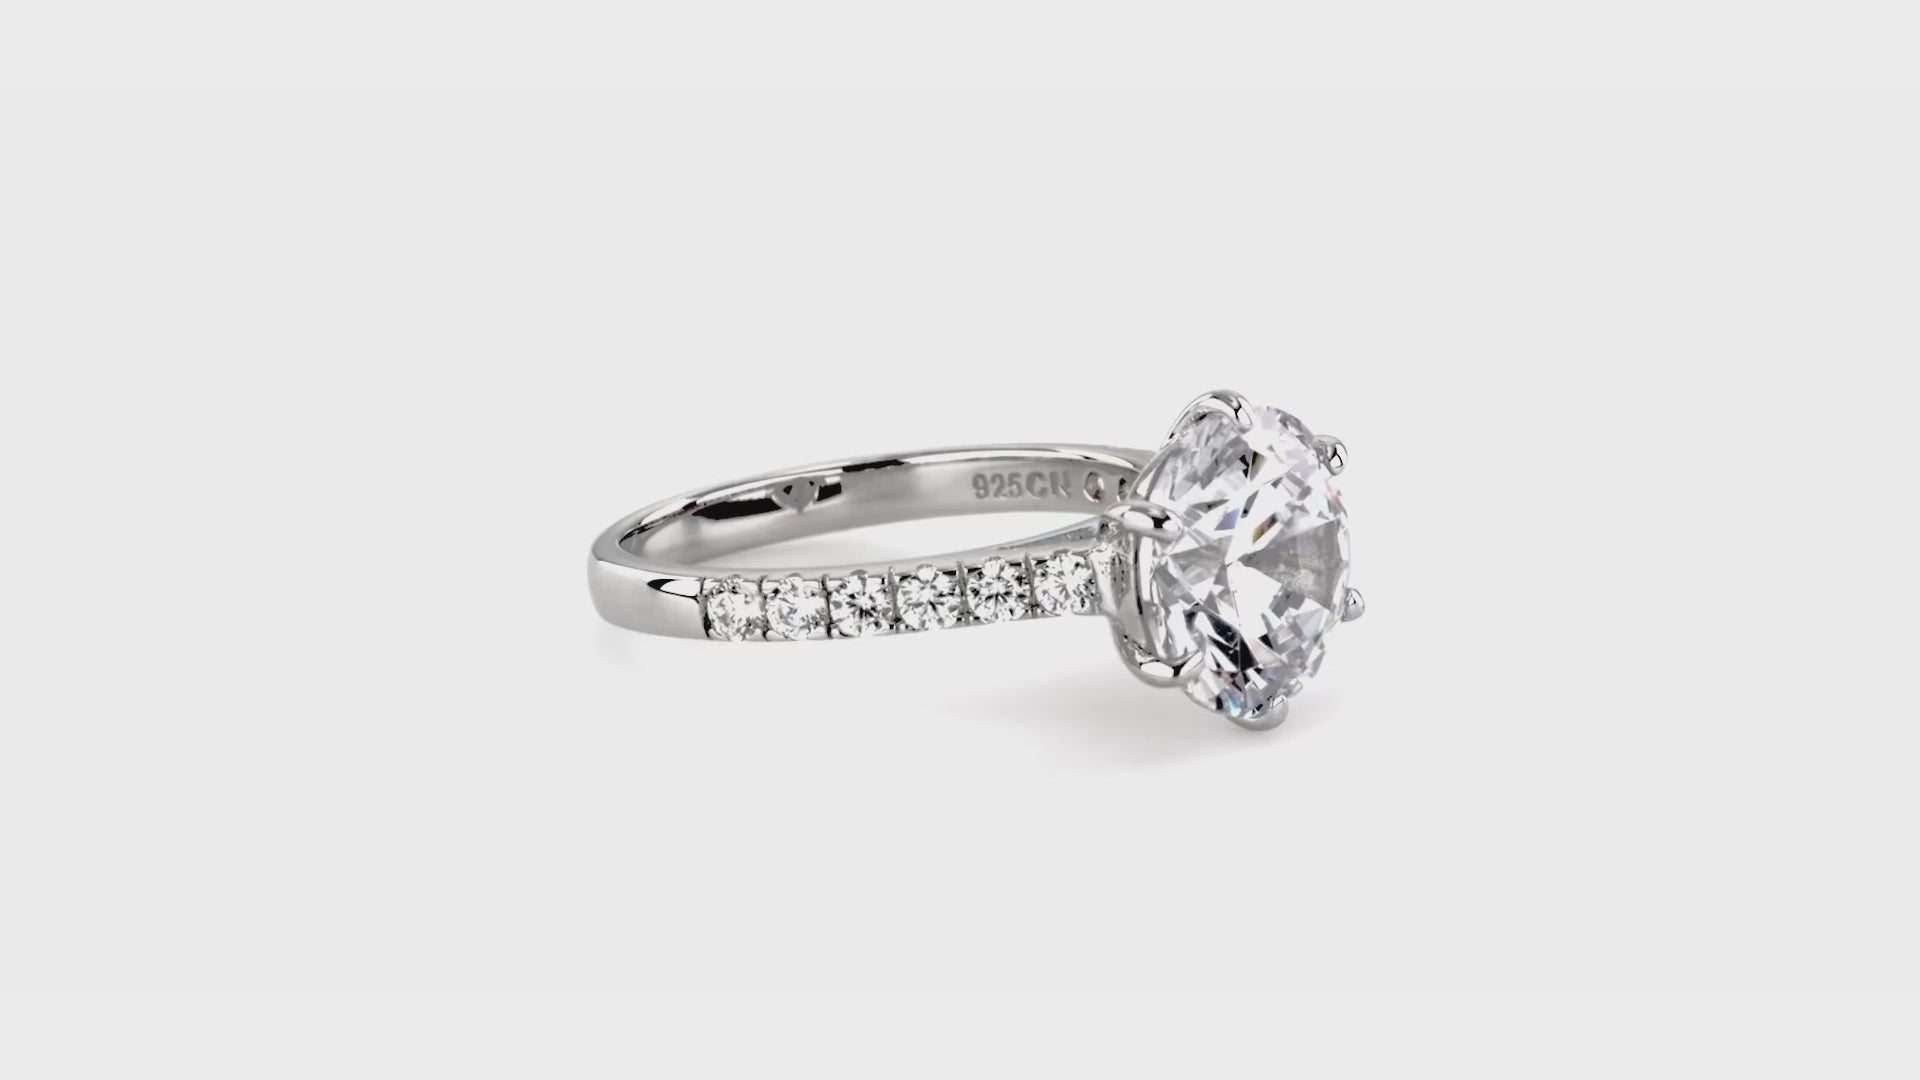 Video Contains Solitaire 3.8ct Round CZ Ring Set in Sterling Silver. Style Number VR357-01